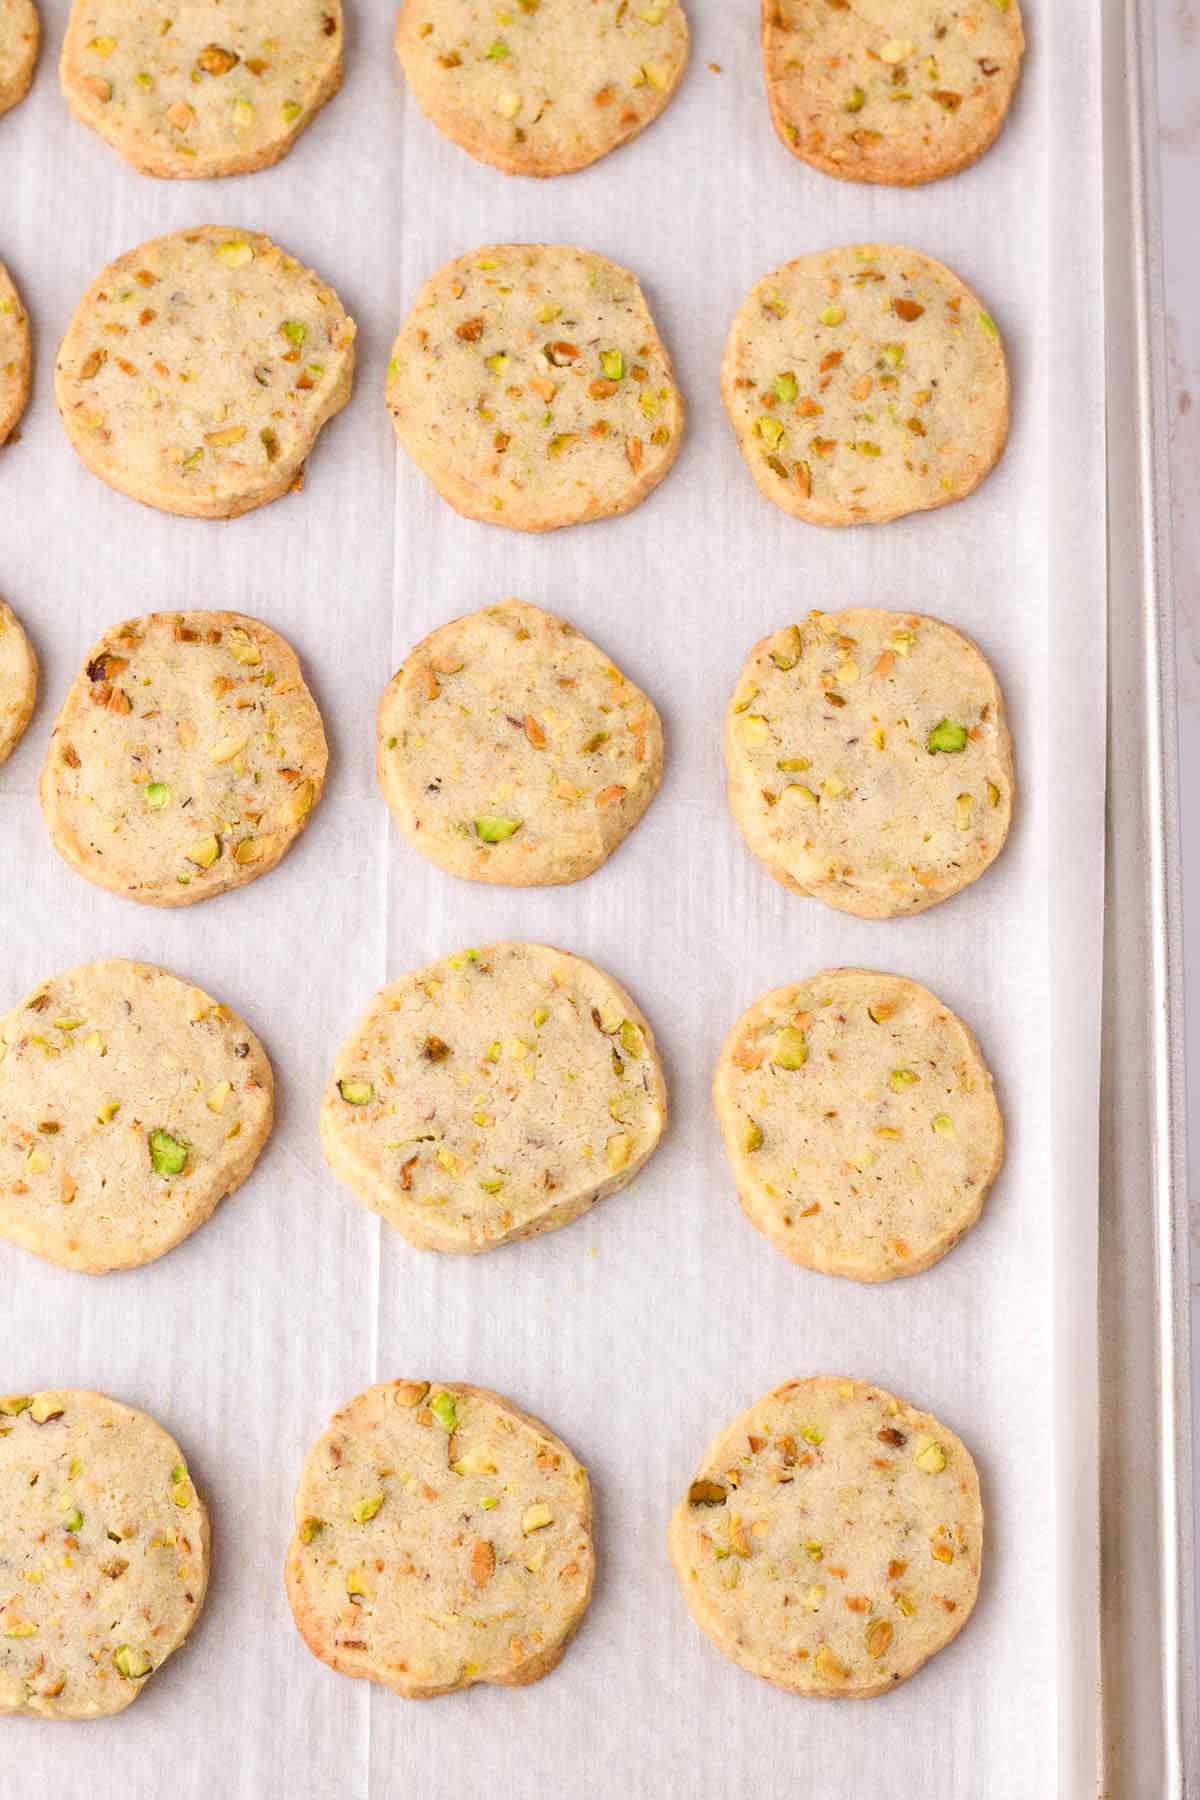 just baked sliced pistachio shortbread cookies on tray